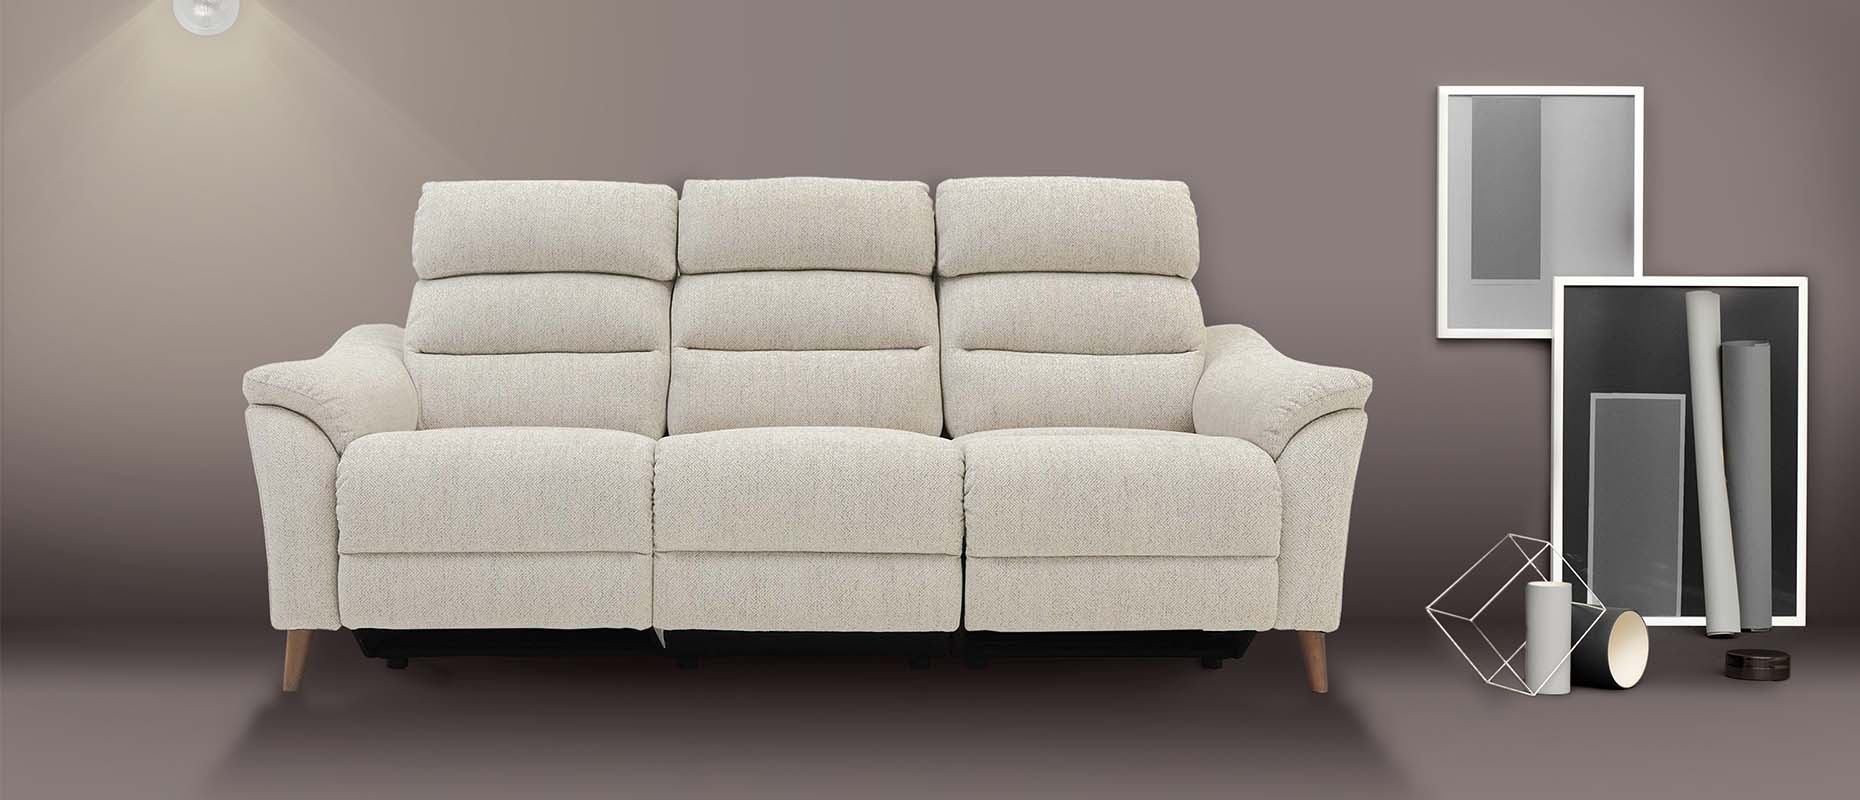 Merritt sofa Collection at Forrest Furnishing